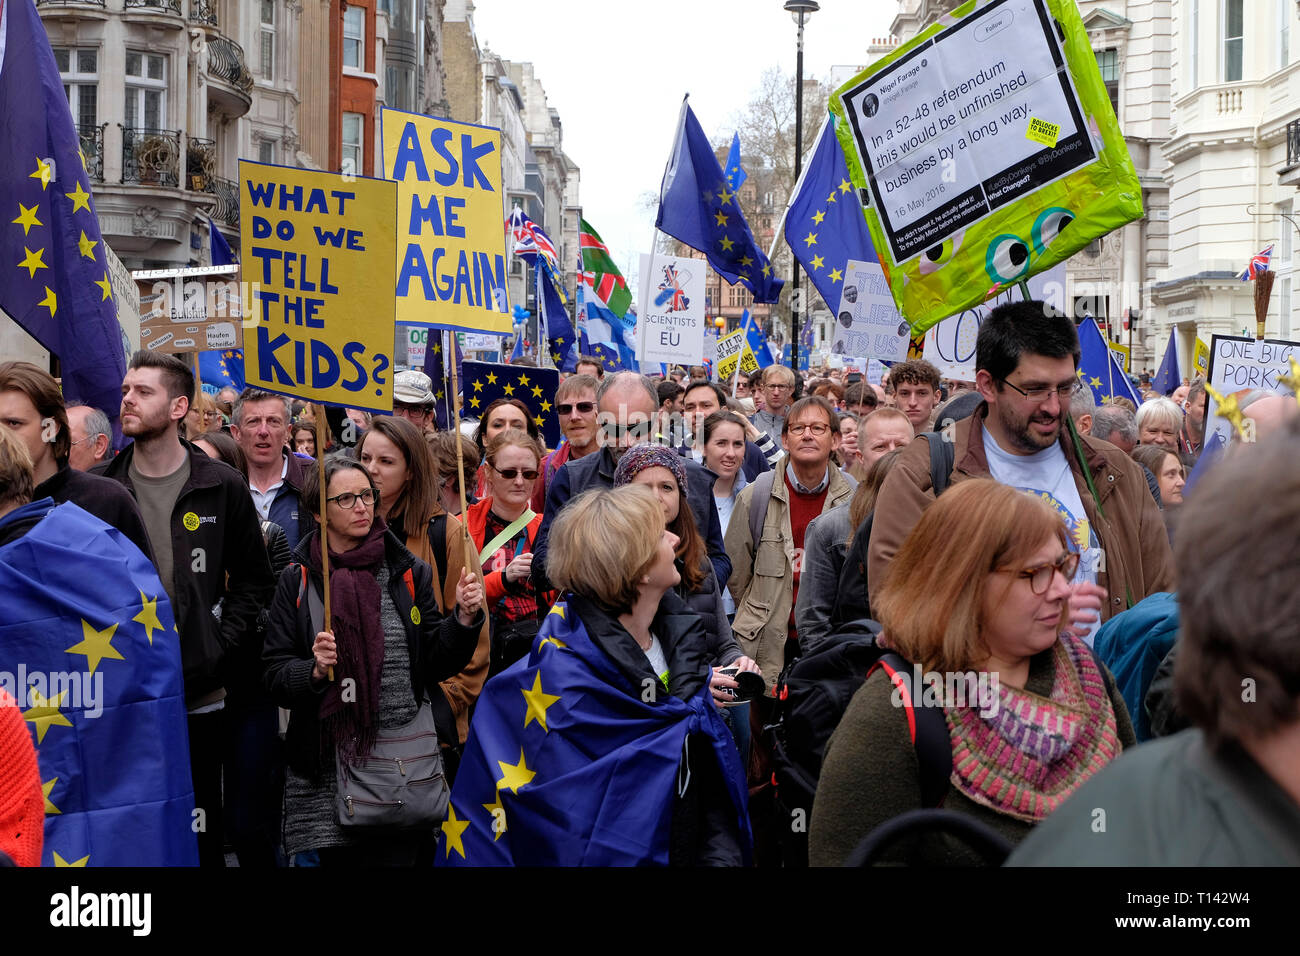 London, UK. 23 March, 2019. ‘Put It To The People March’, organised by the People’s Vote Campaign and run by British pro-European campaign group Open Britain, takes place in central London, starting at Park Lane via Piccadilly to Parliament Square and attracting demonstrators from across the country who want a new Brexit referendum. Credit: Malcolm Park/Alamy Live News. Stock Photo